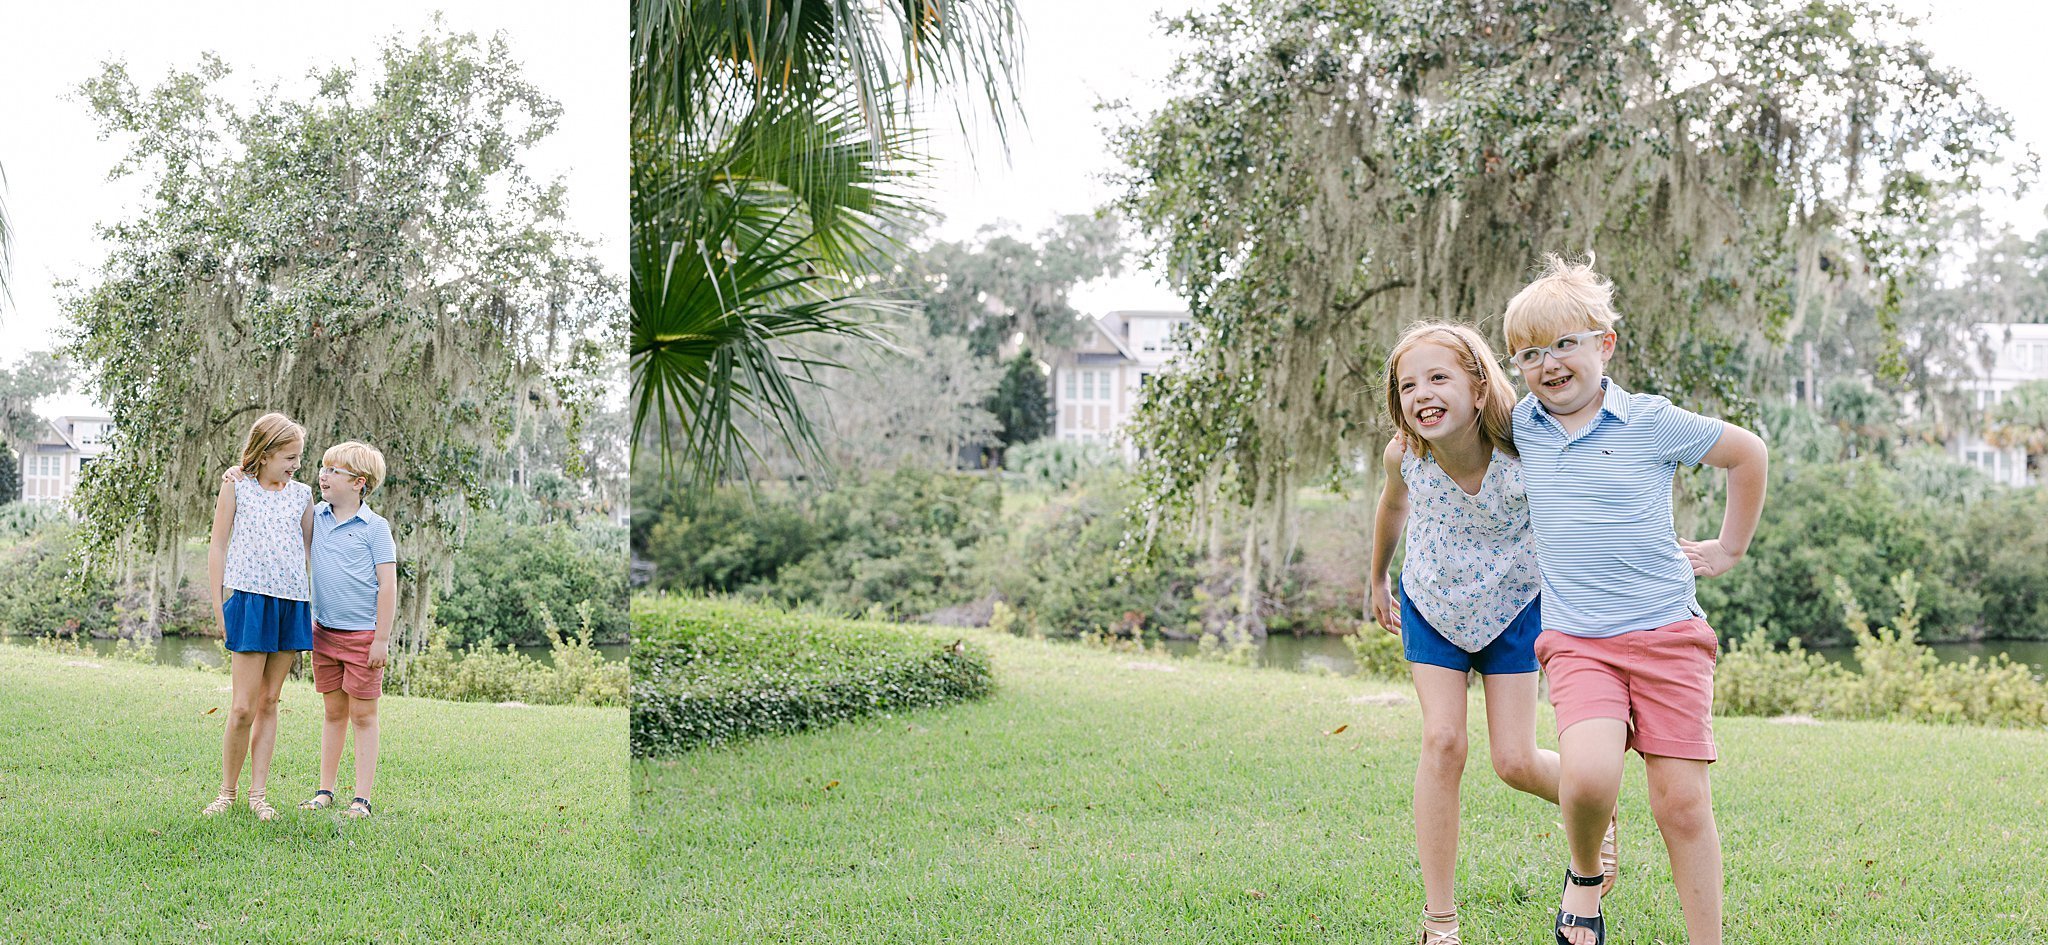 Katherine_Ives_Photography_Patton_Family_Montage_Palmetto_Bluff_10241.JPG